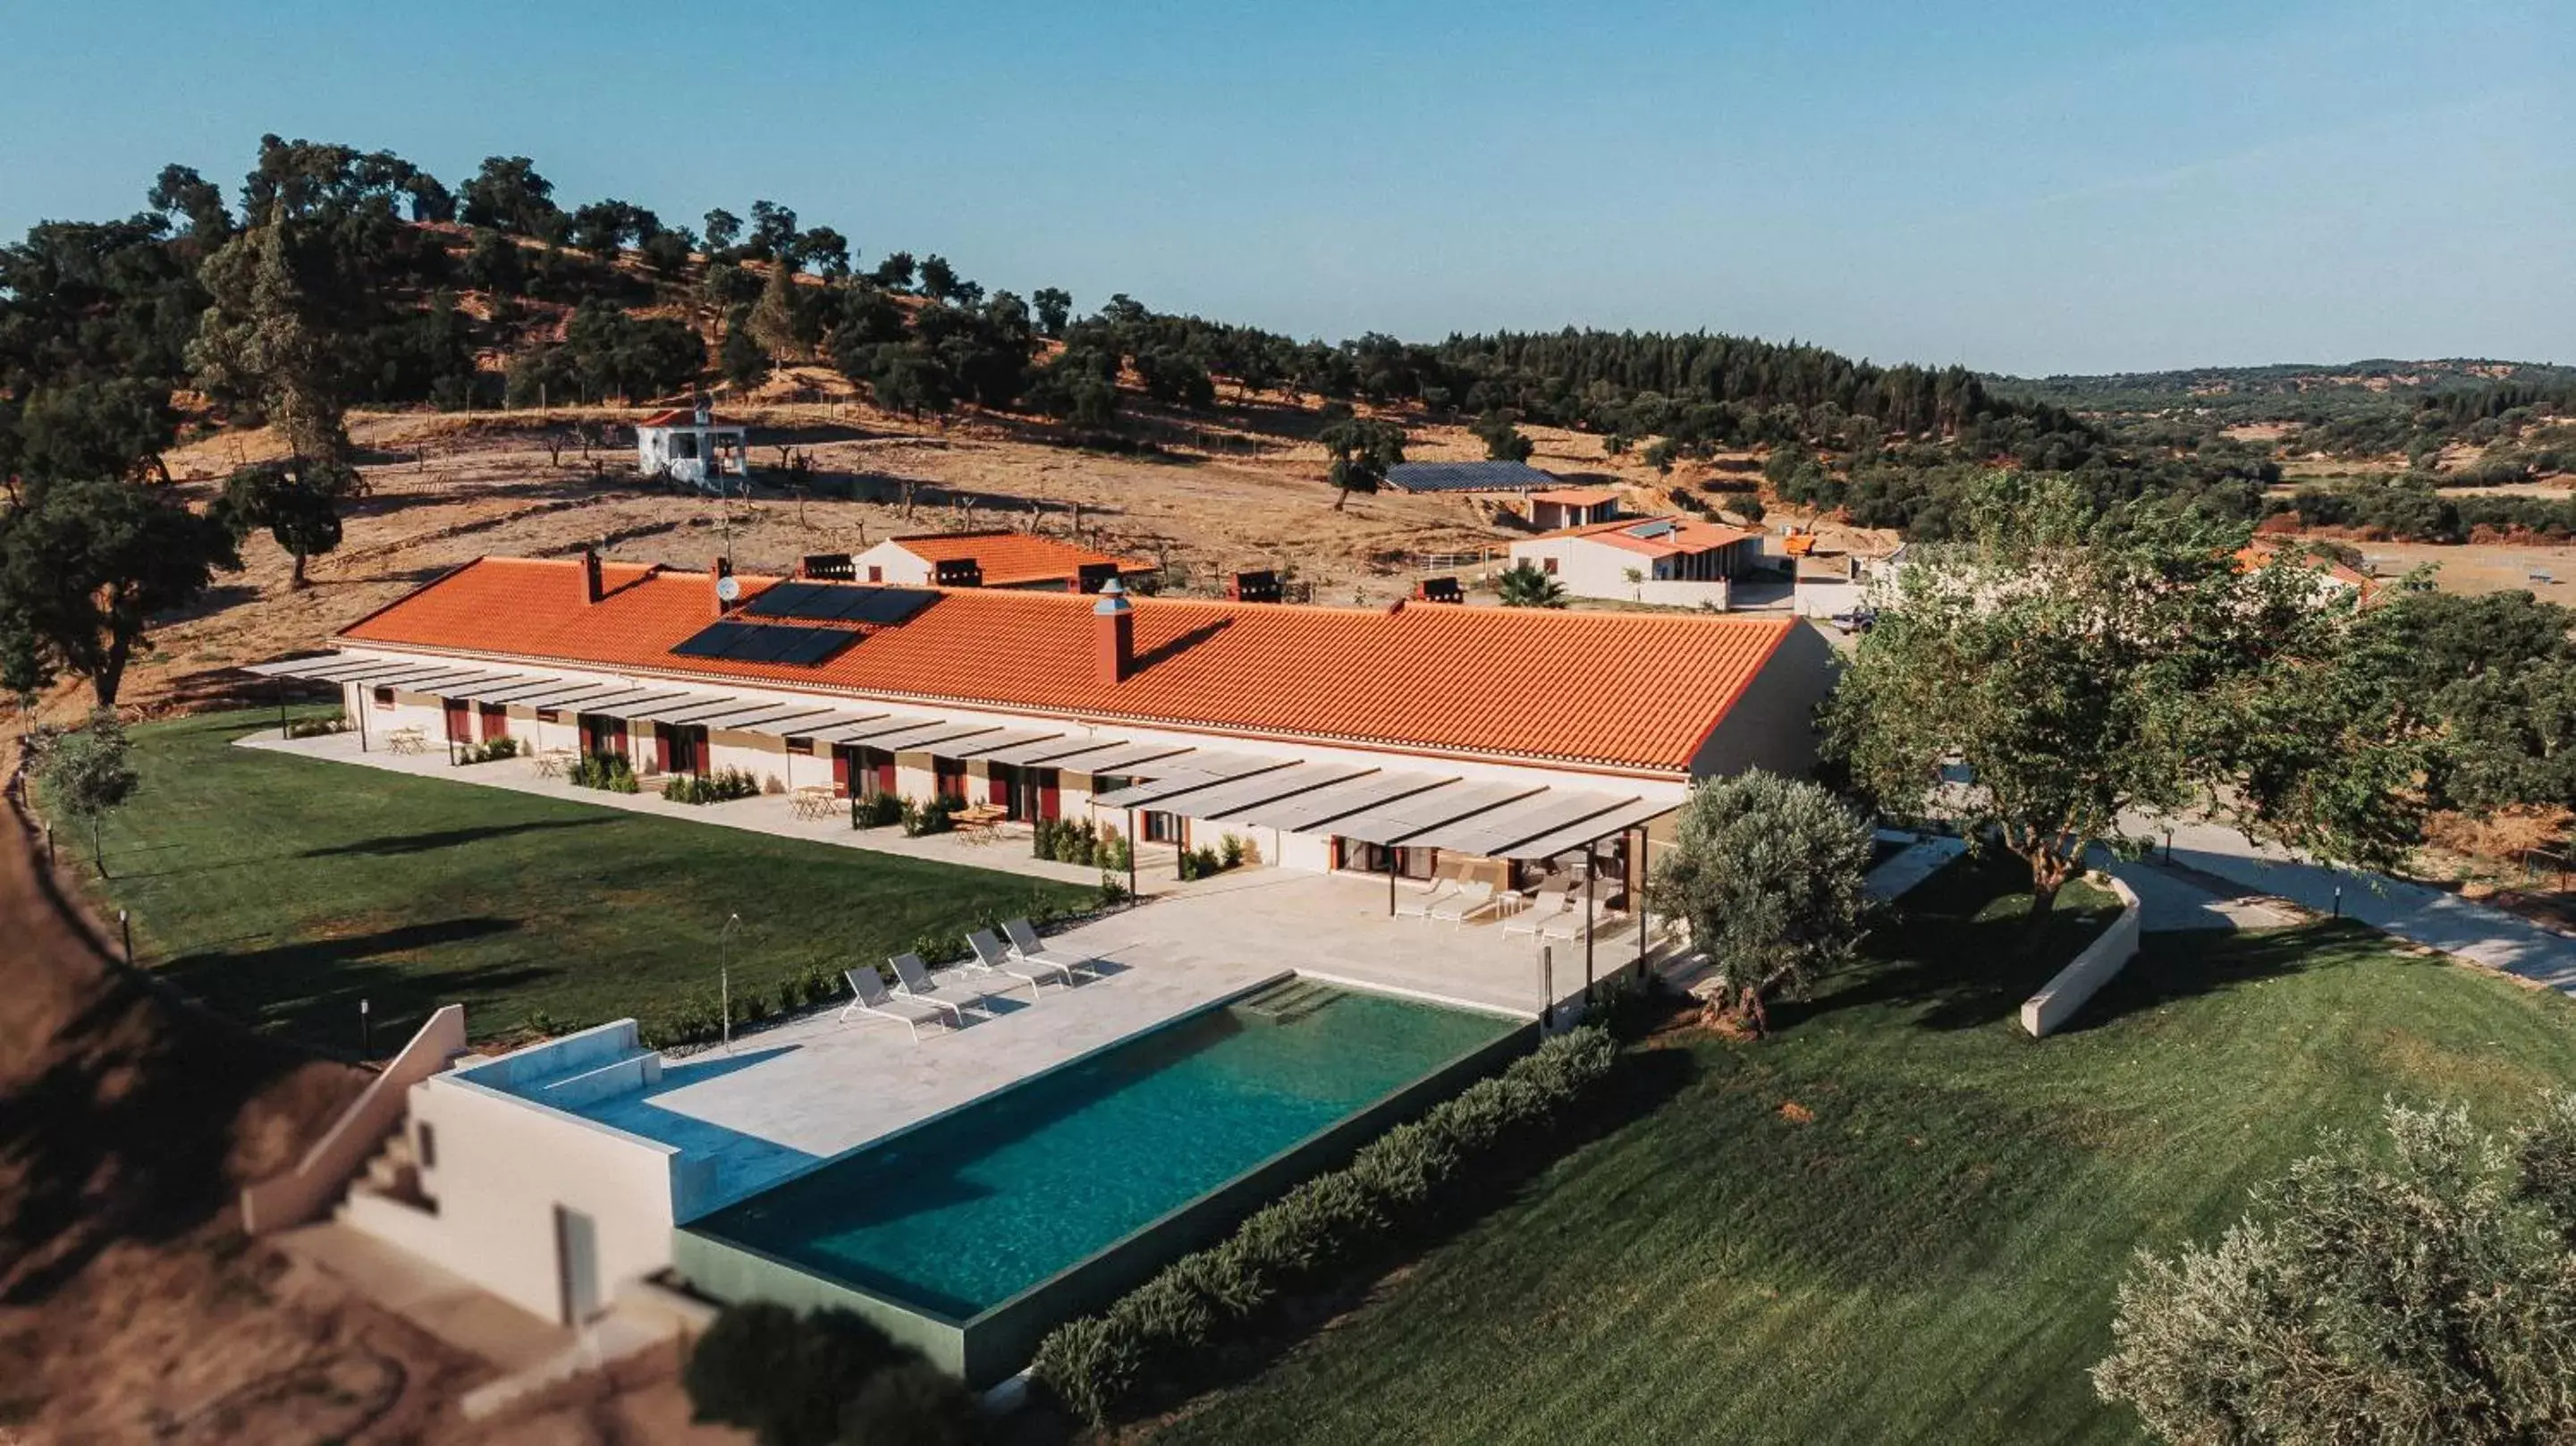 Property building, Pool View in Herdade dos Cordeiros